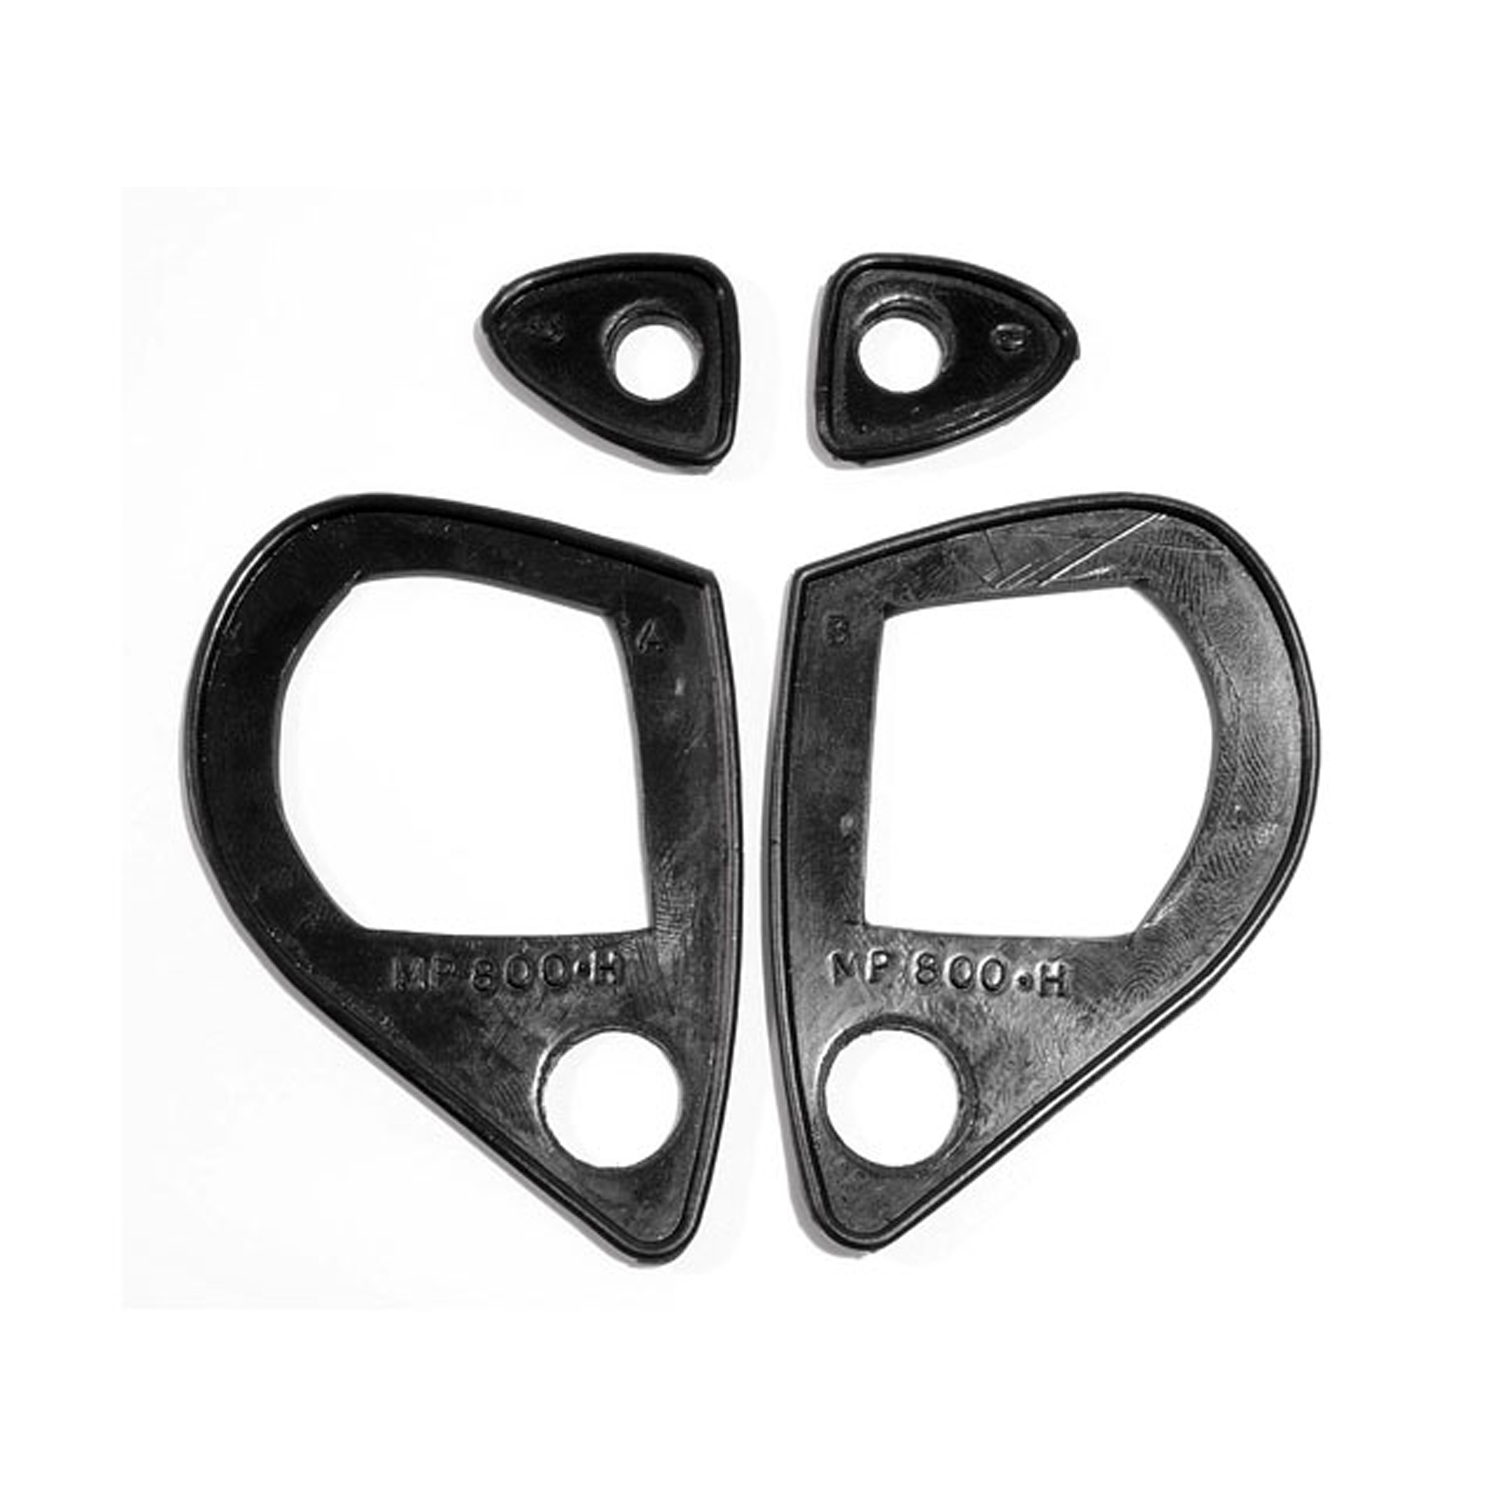 1964 Ford Falcon Door Handle Pads.  Replaces OEM #C34Z6222428A-9A-MP 800-H